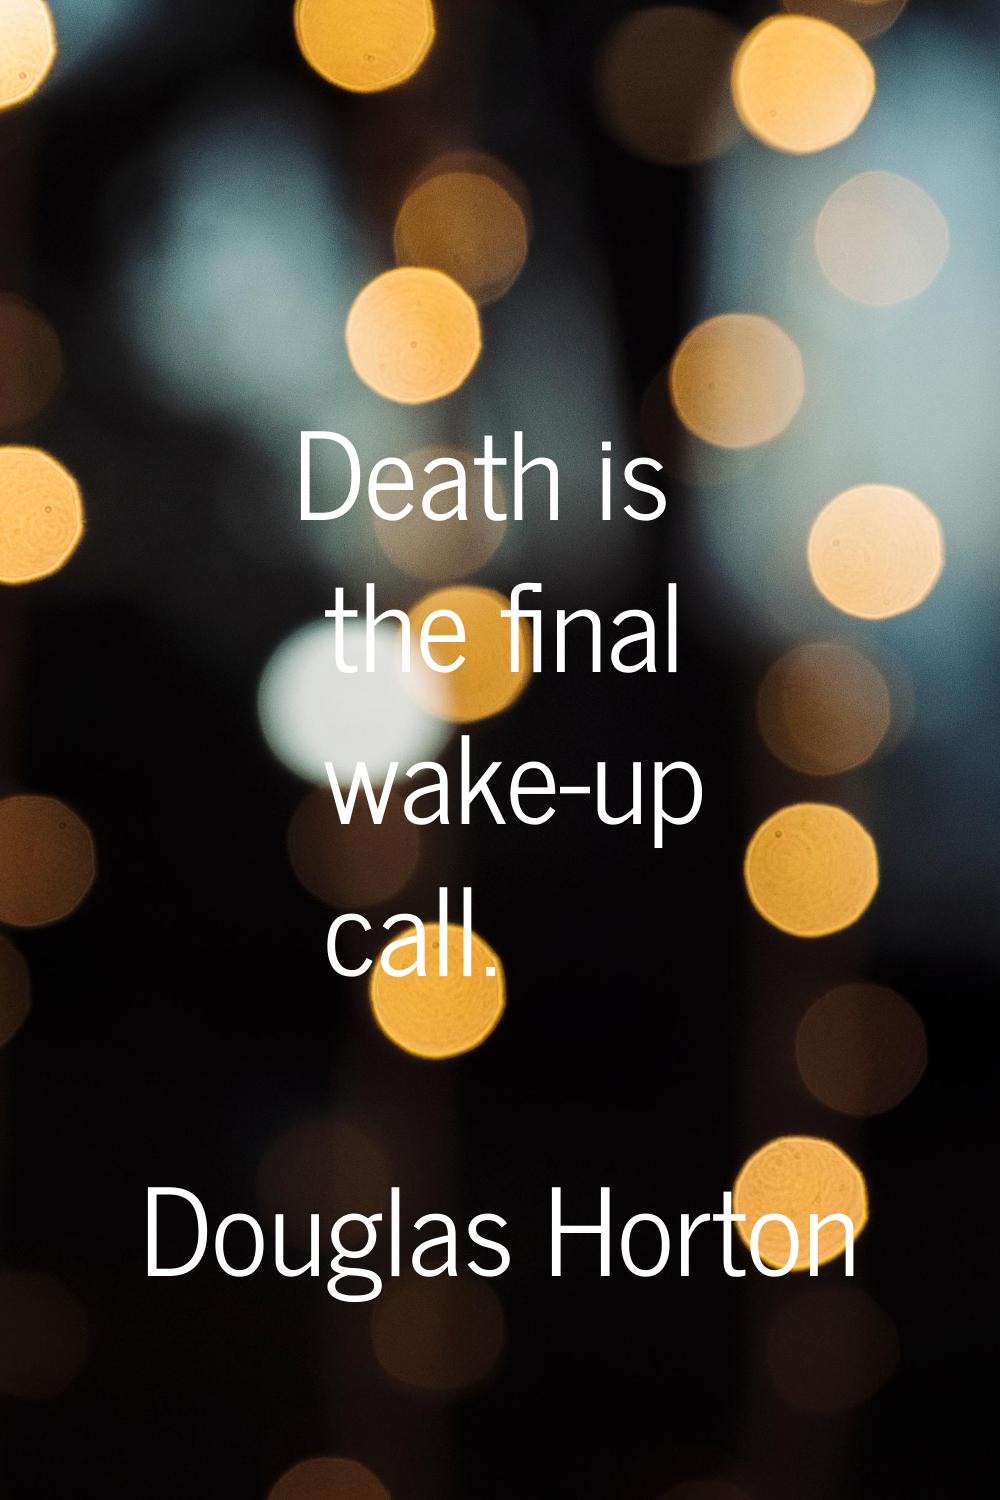 Death is the final wake-up call.